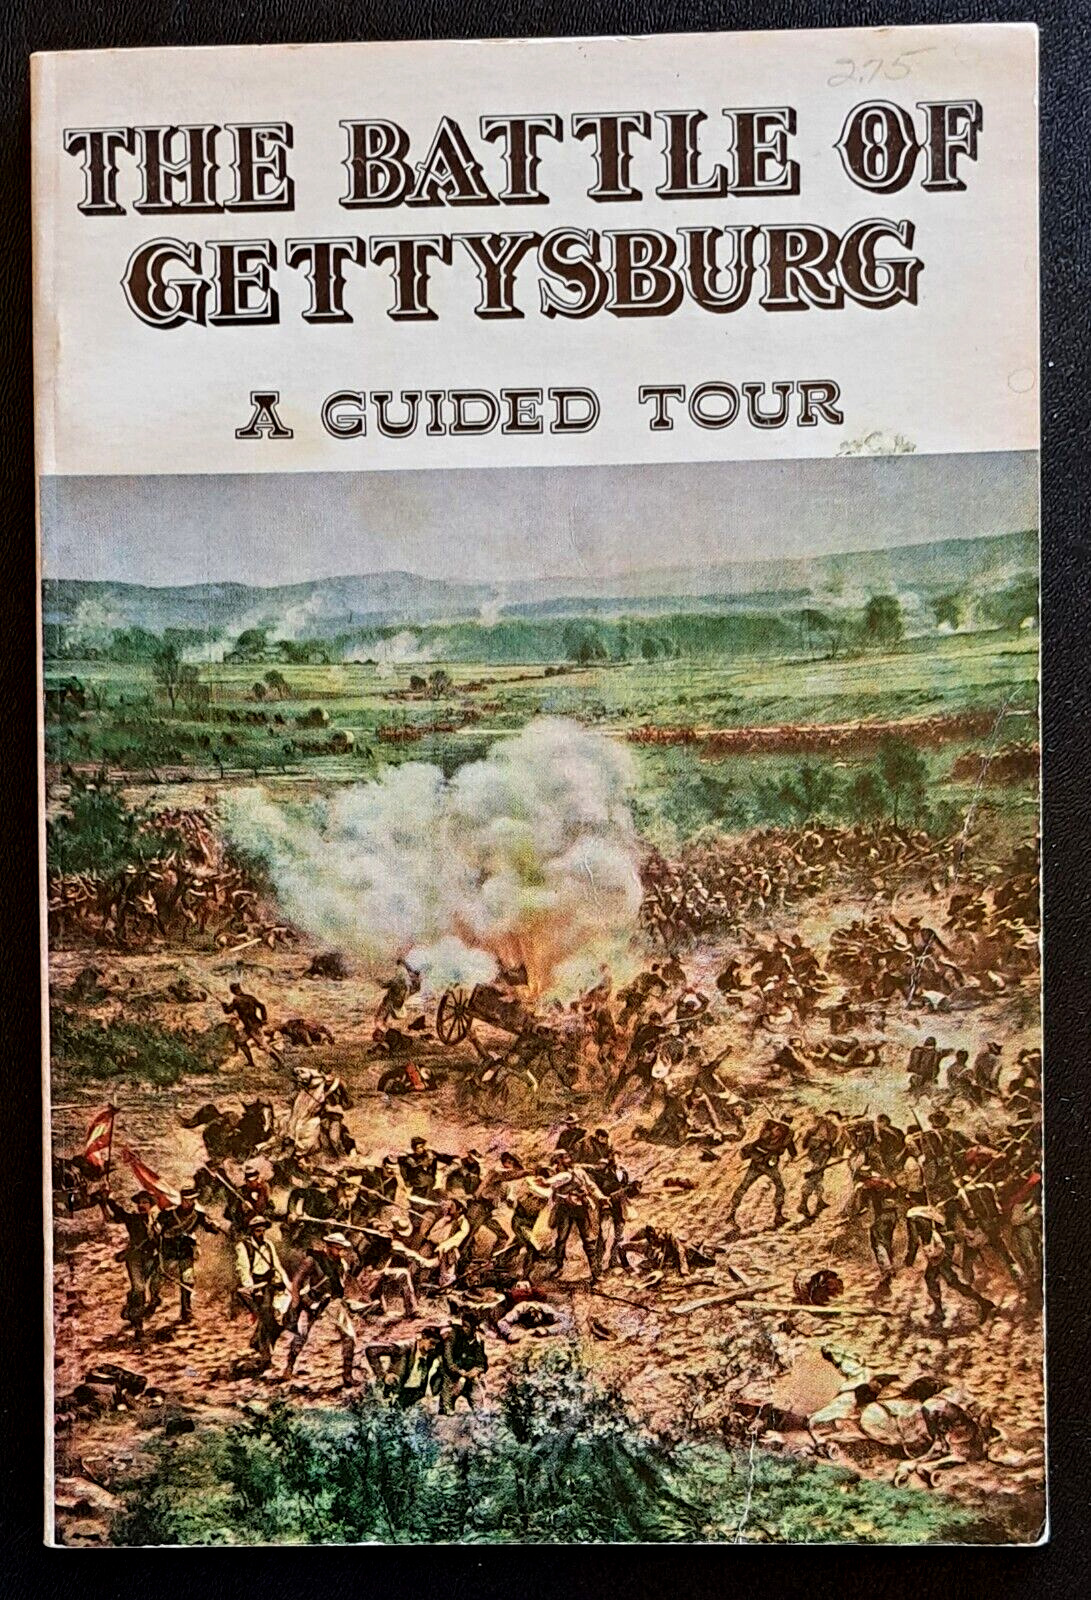 The Battle of Gettysburg, A Guided Tour by Gen. Stackpole, Stackpole Books, 1963